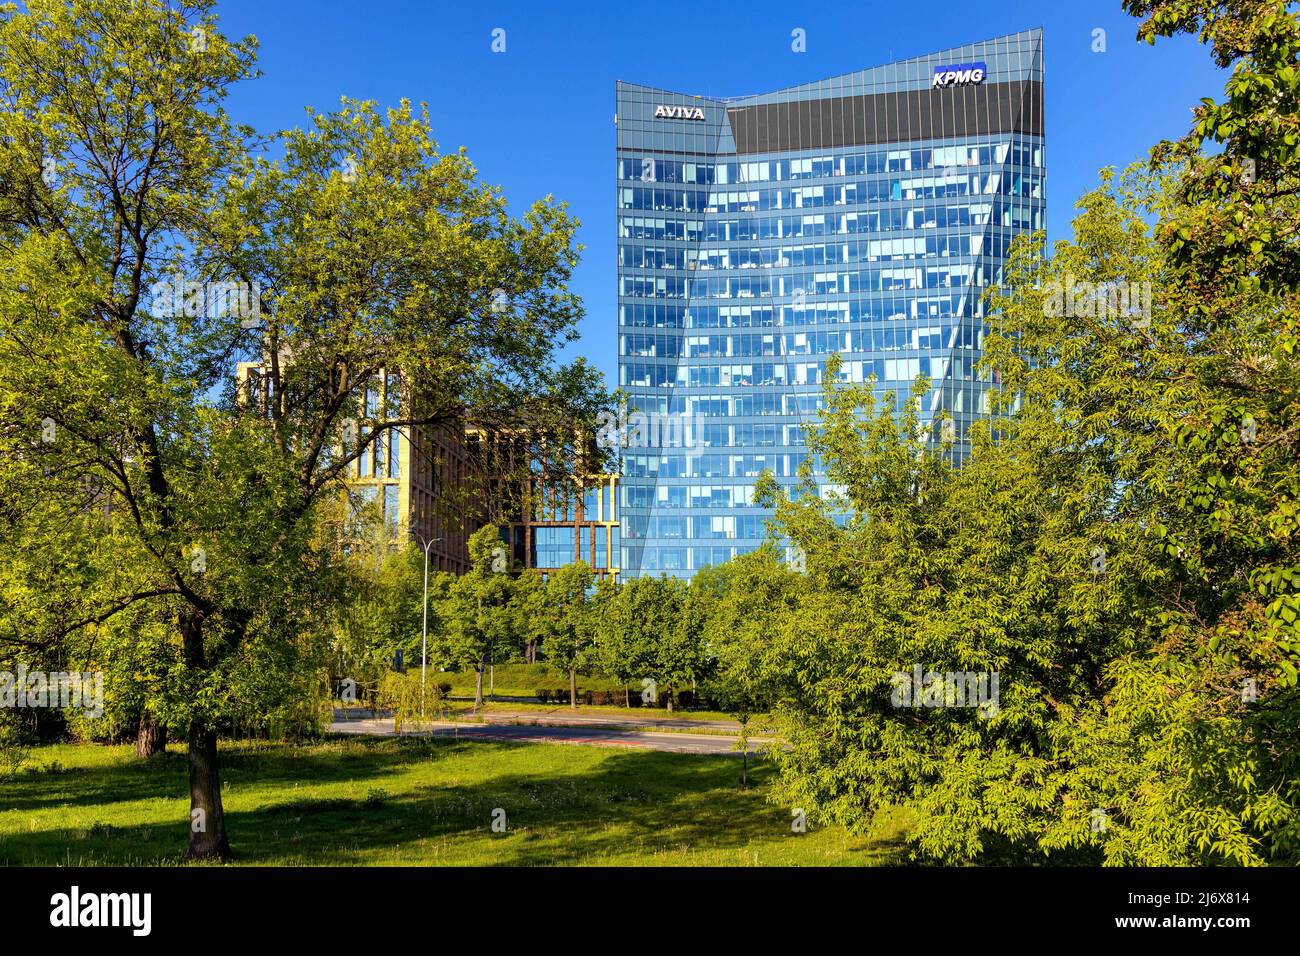 Warsaw, Poland - May 10, 2020: Panoramic view of Gdanski Business Center commercial quarter in northern Srodmiescie district of Warsaw Stock Photo